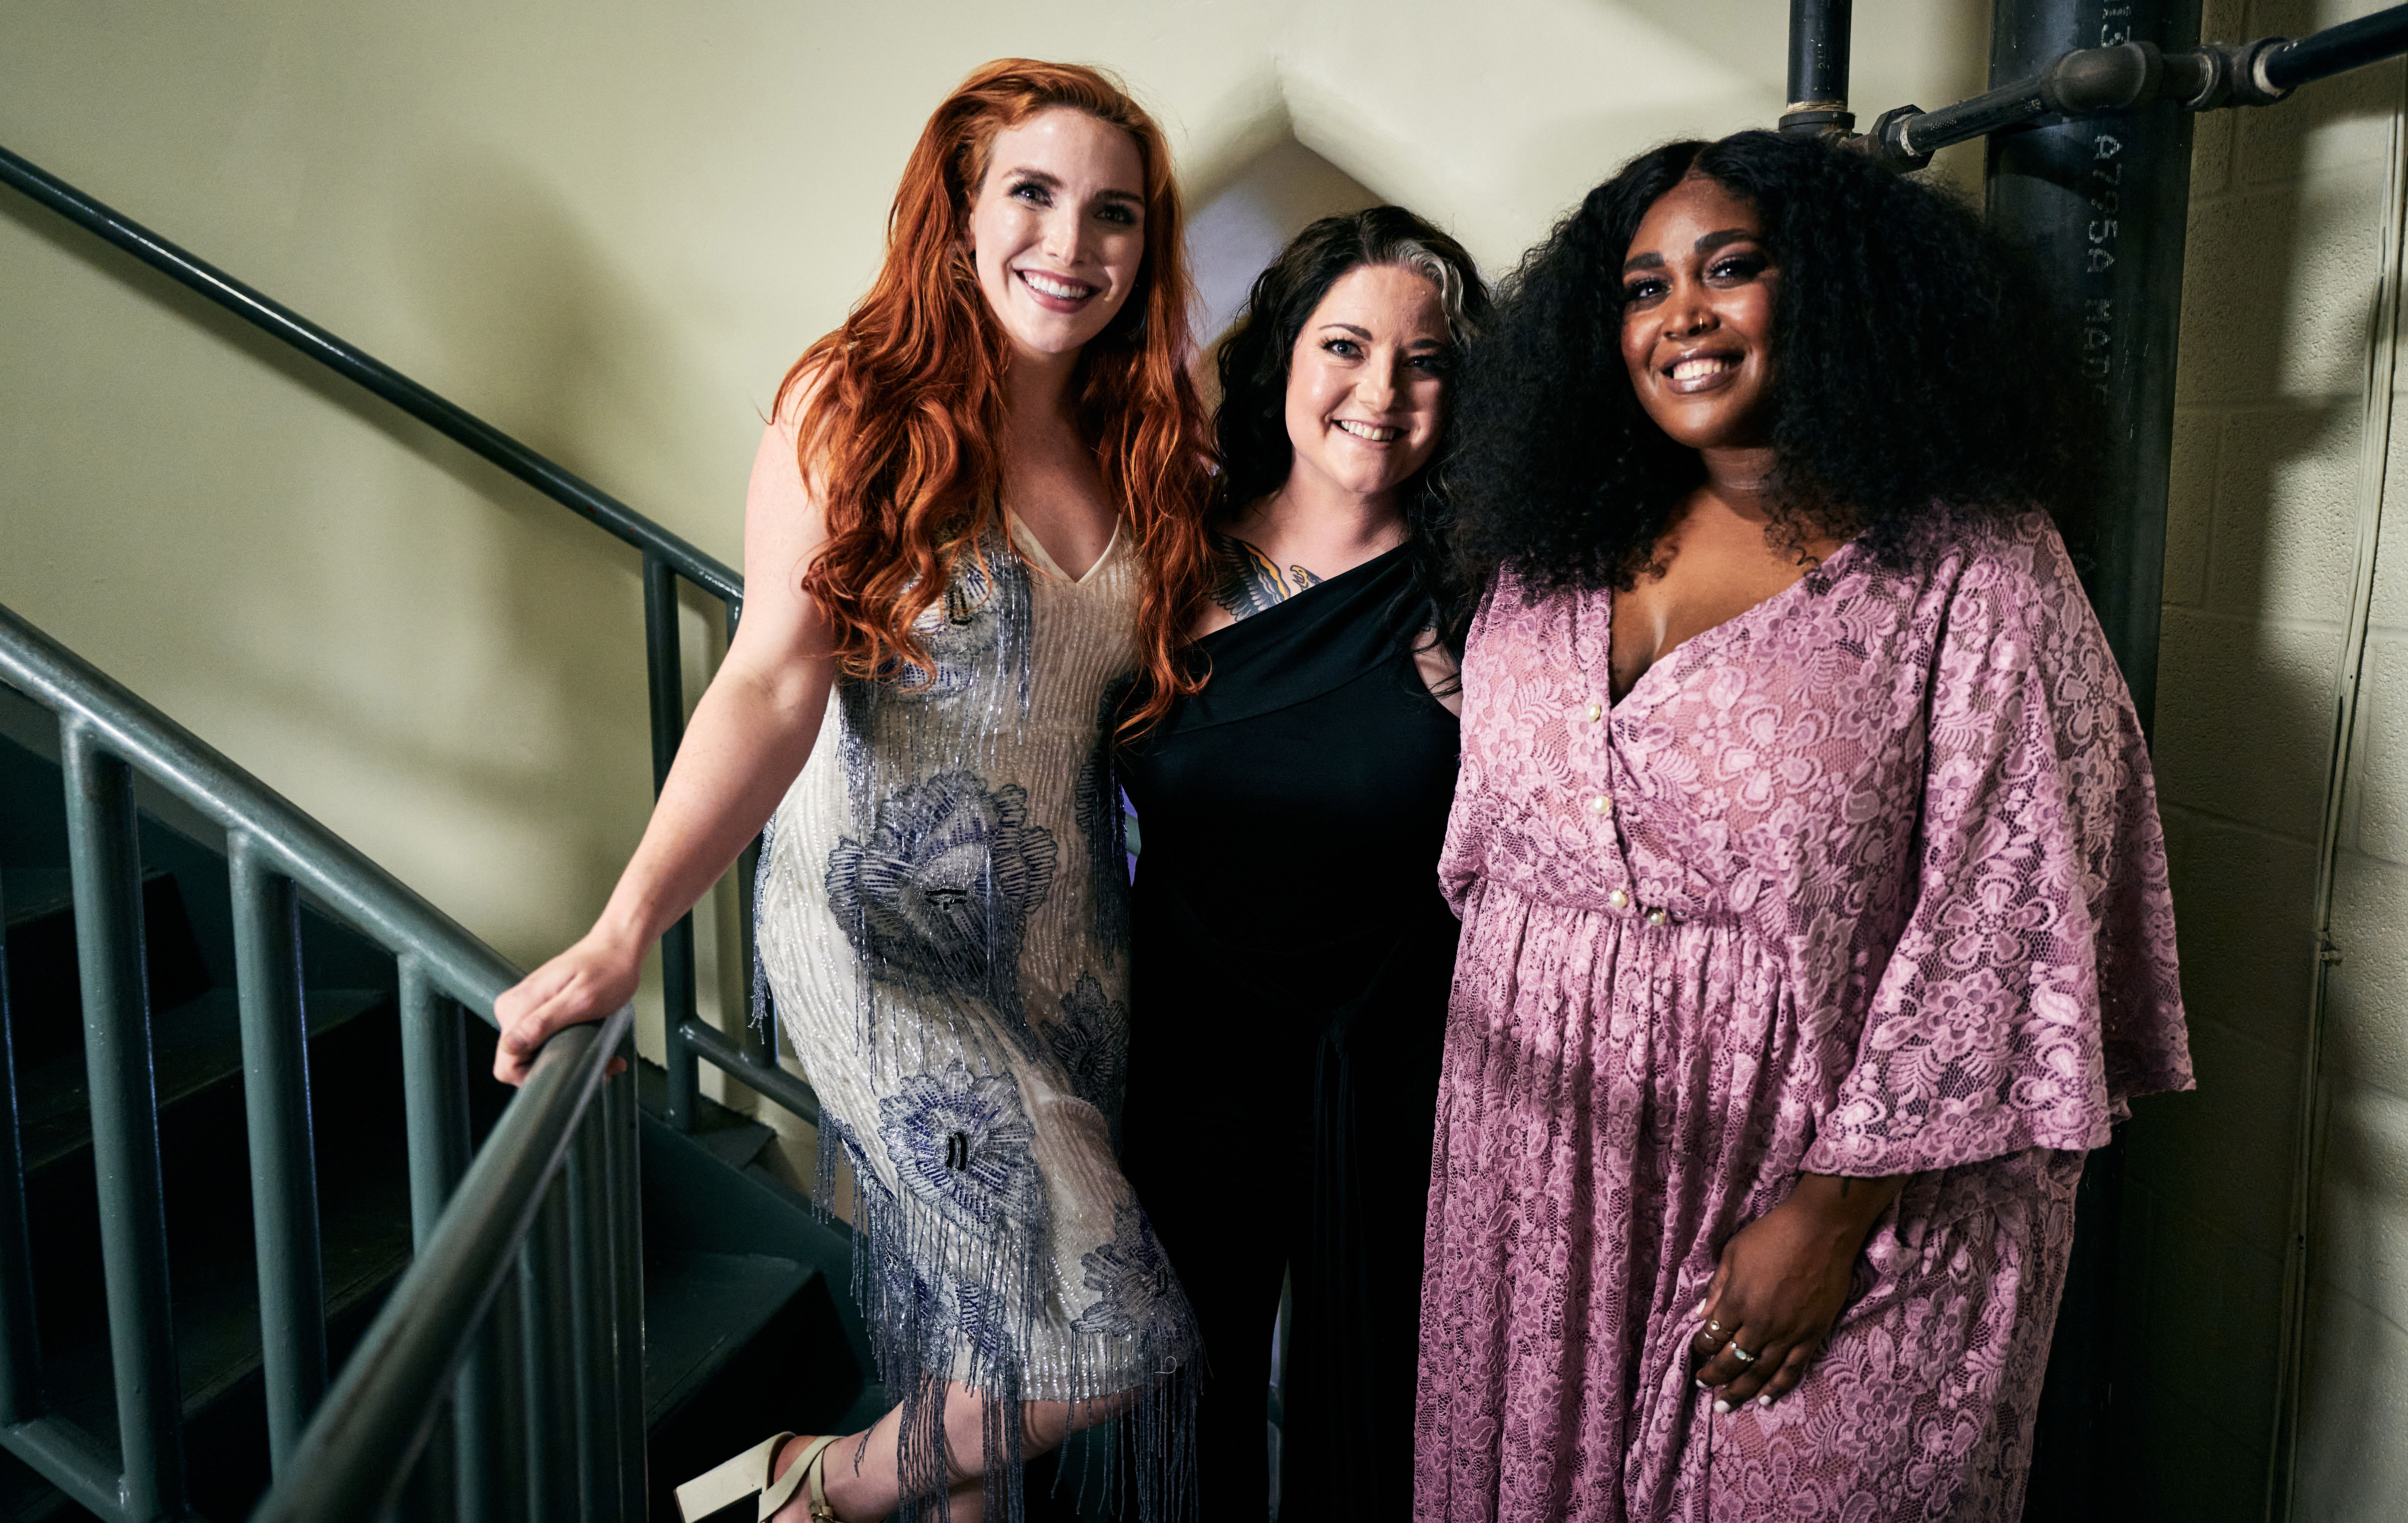 Caylee Hammack, Ashley McBryde and Brittney Spencer at Ryman Auditorium on August 25, 2021, in Nashville, Tennessee.  | Source: Getty Images